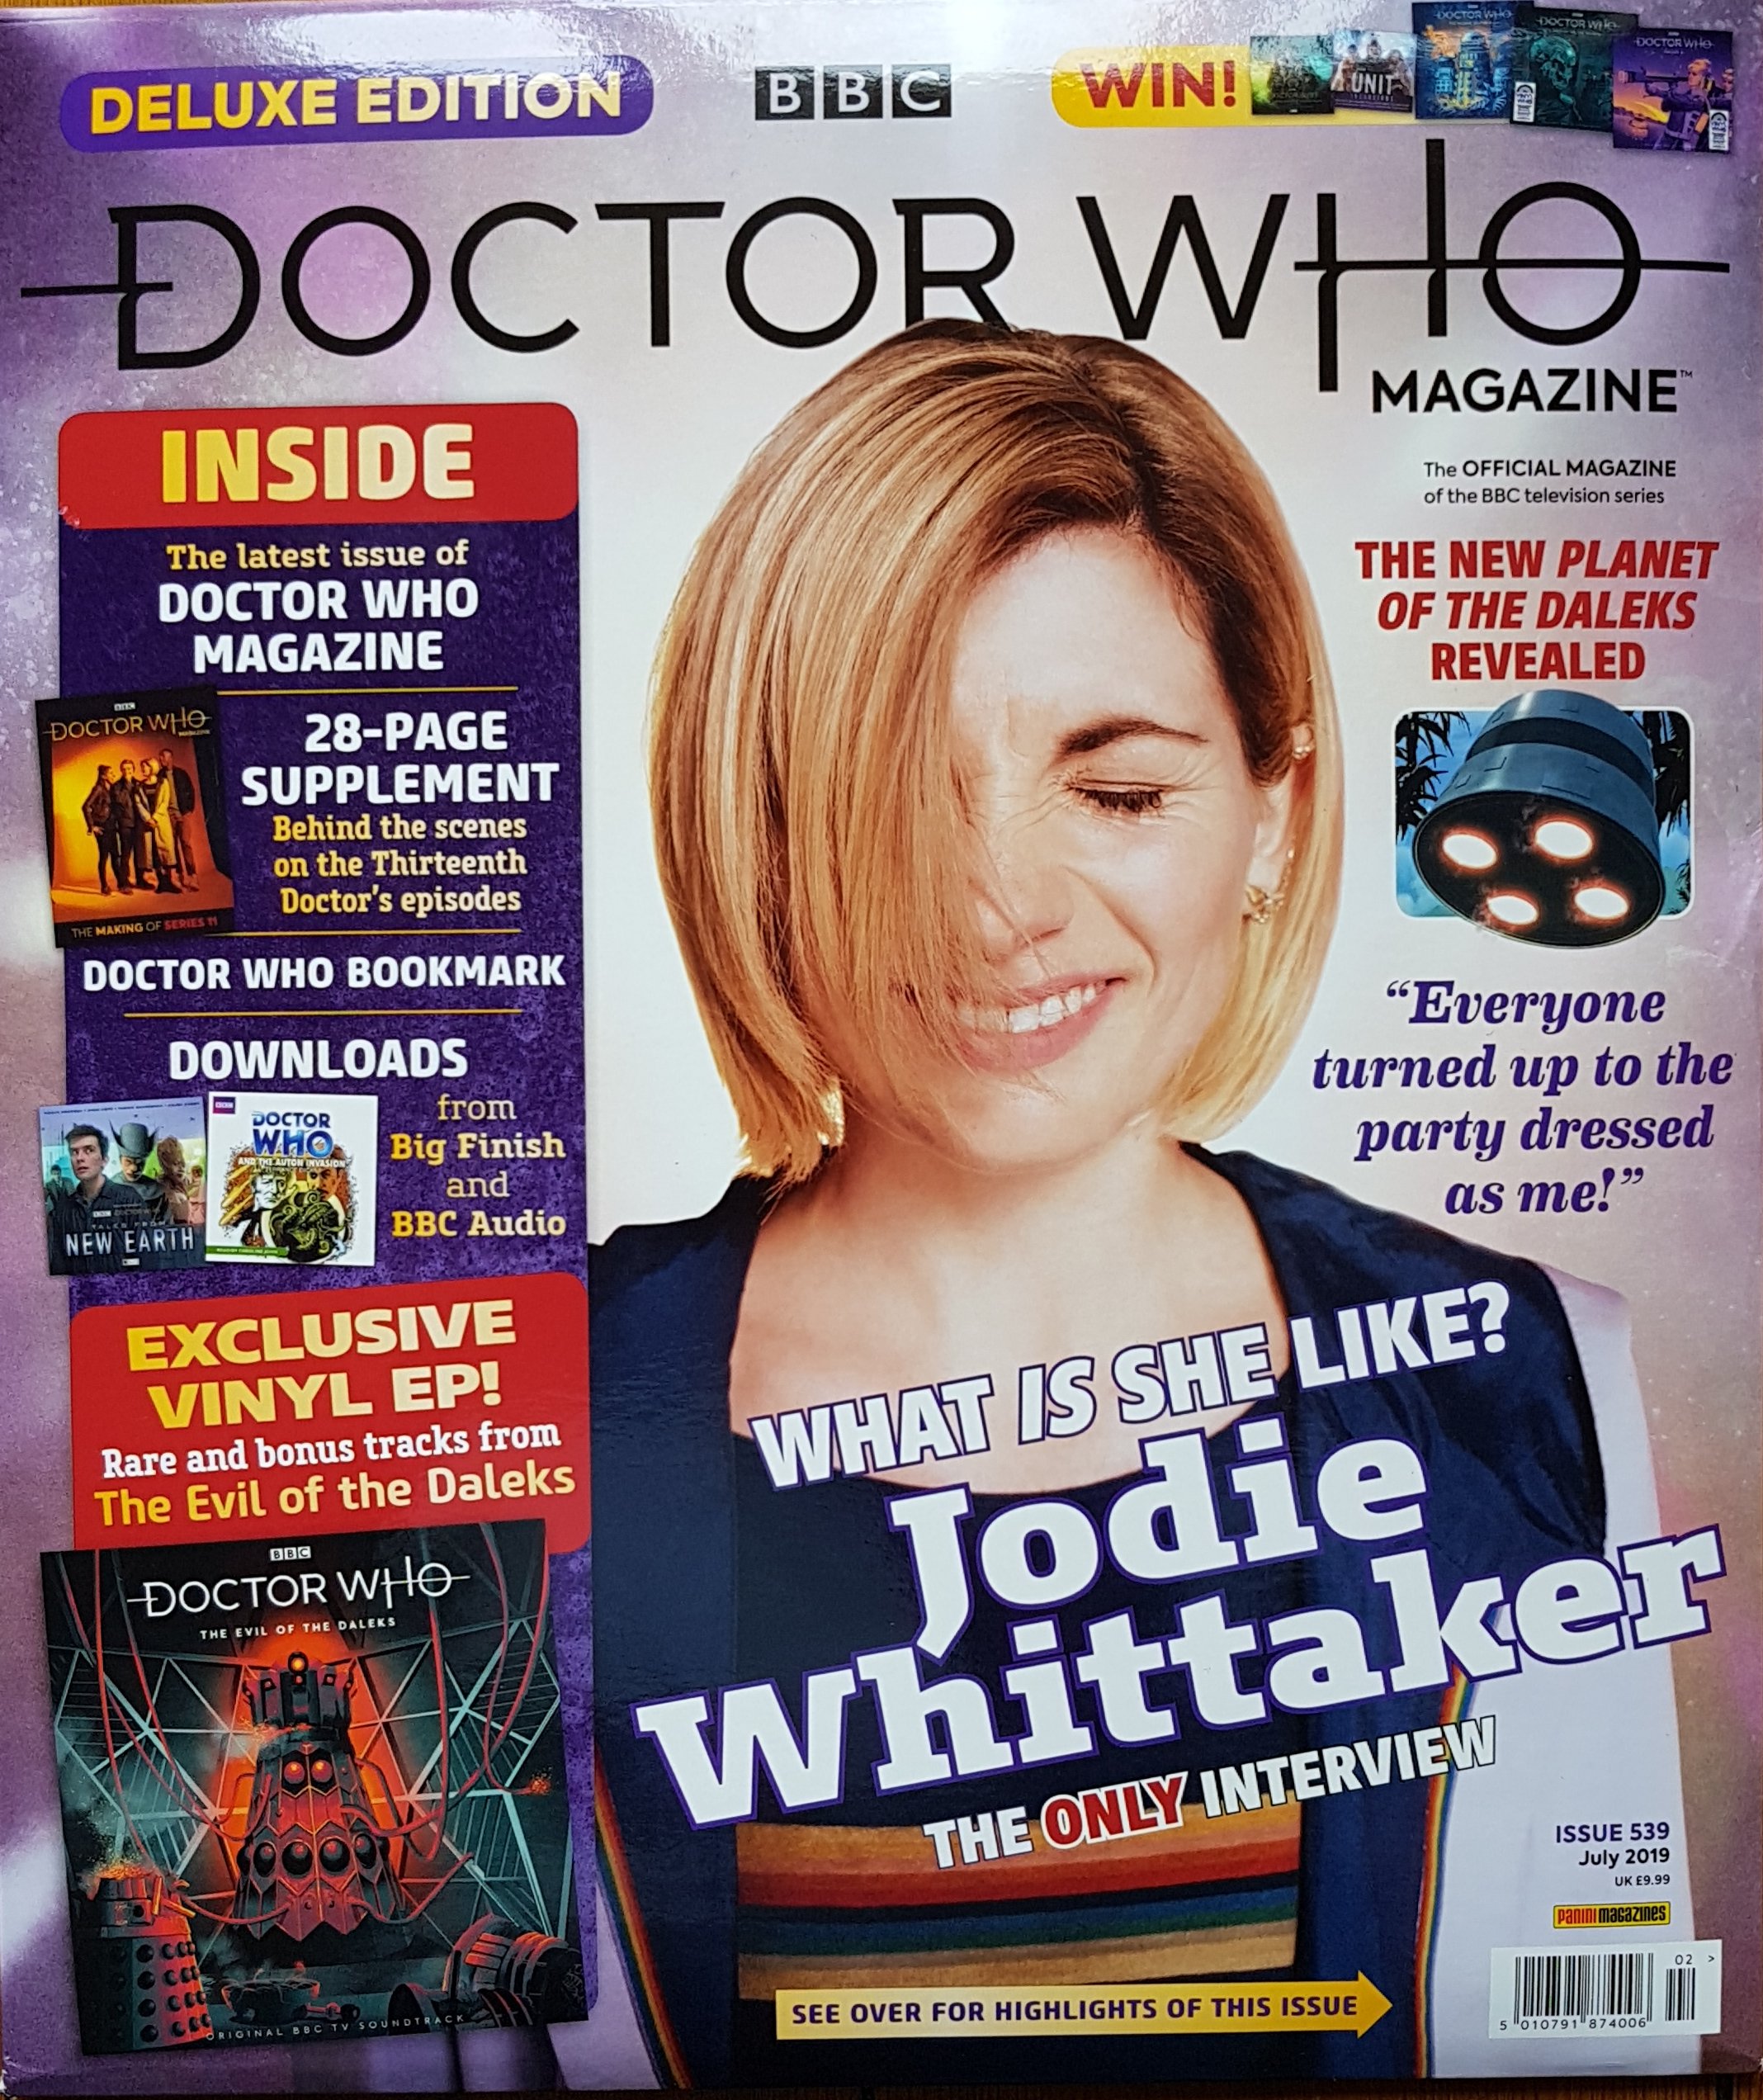 Picture of 5 010791 874006 02 Doctor Who magazine - Issue 539 by artist Various from the BBC records and Tapes library